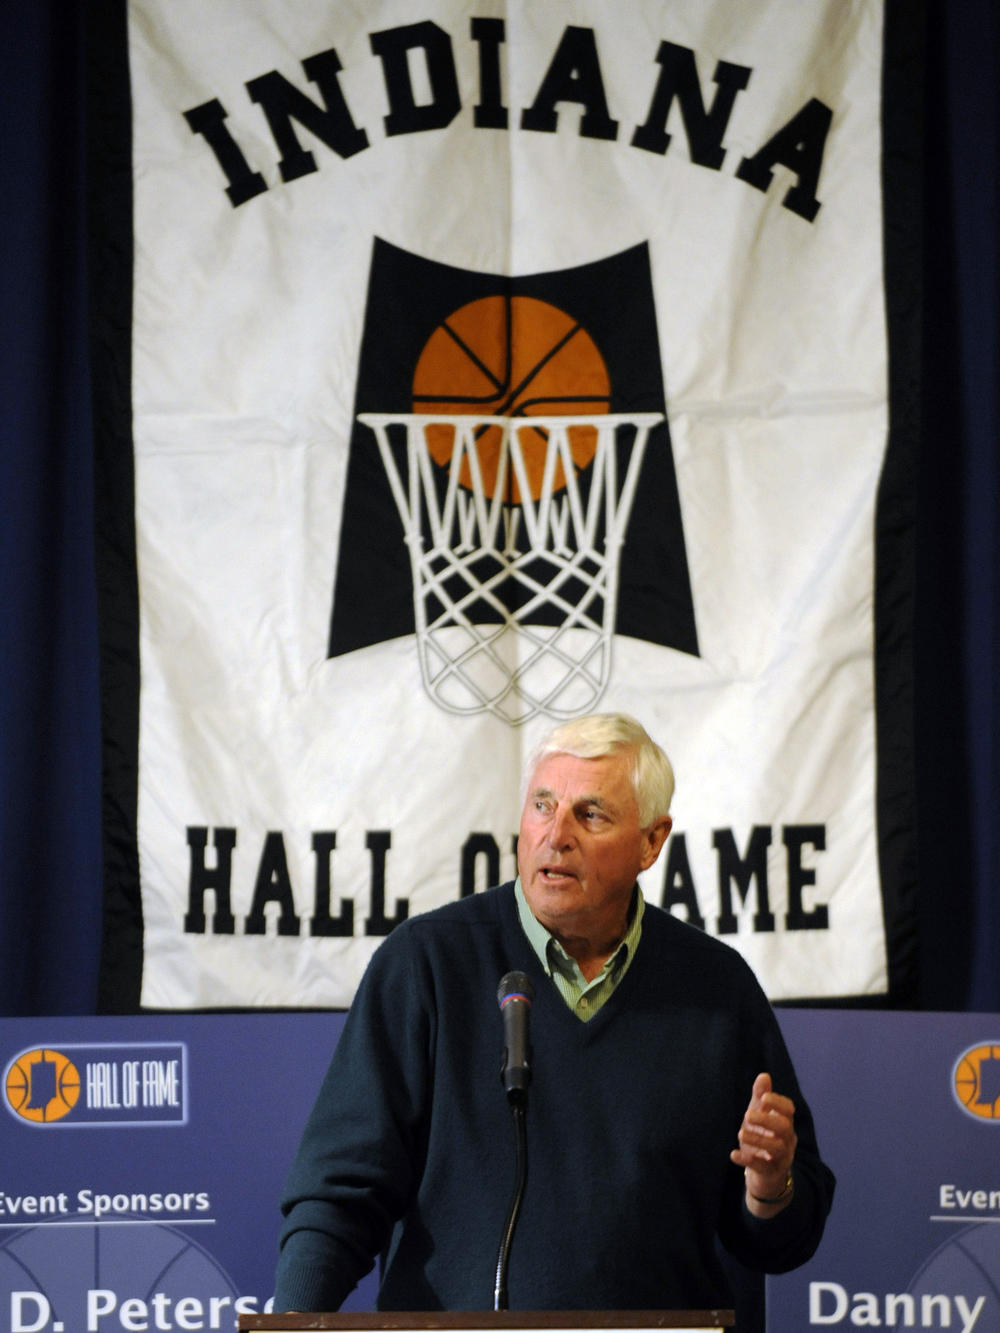 Former Indiana University basketball coach Bobby Knight speaks at a fundraising dinner for the Indiana Basketball Hall of Fame in Indianapolis on Dec. 17, 2009.